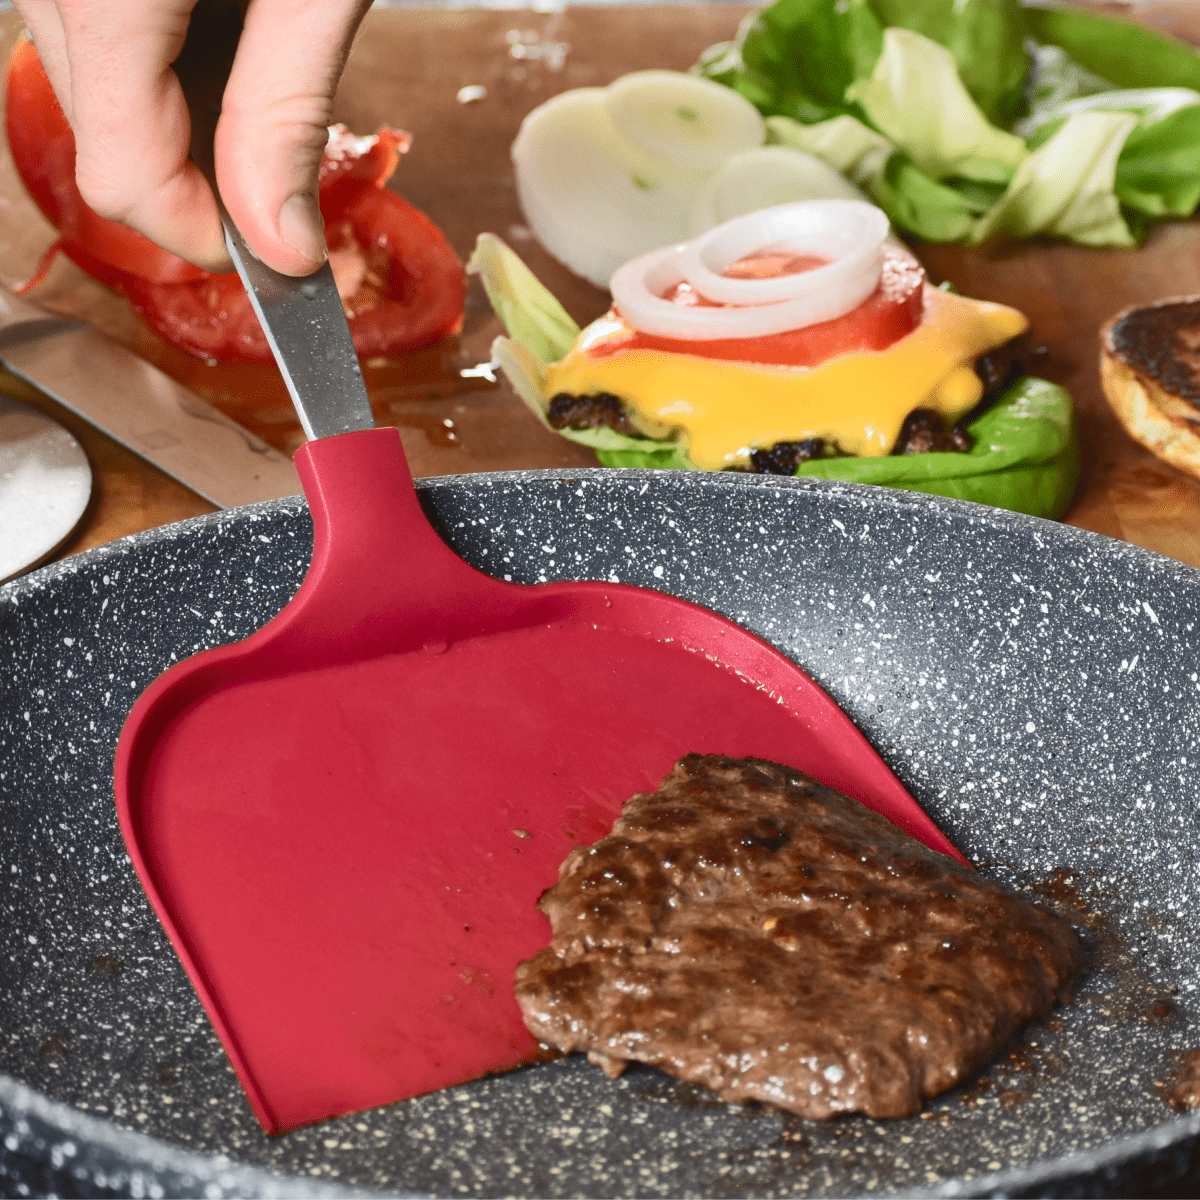 The Sasquash - Make Delicious Smash Burgers with the Ultimate Tool Kit